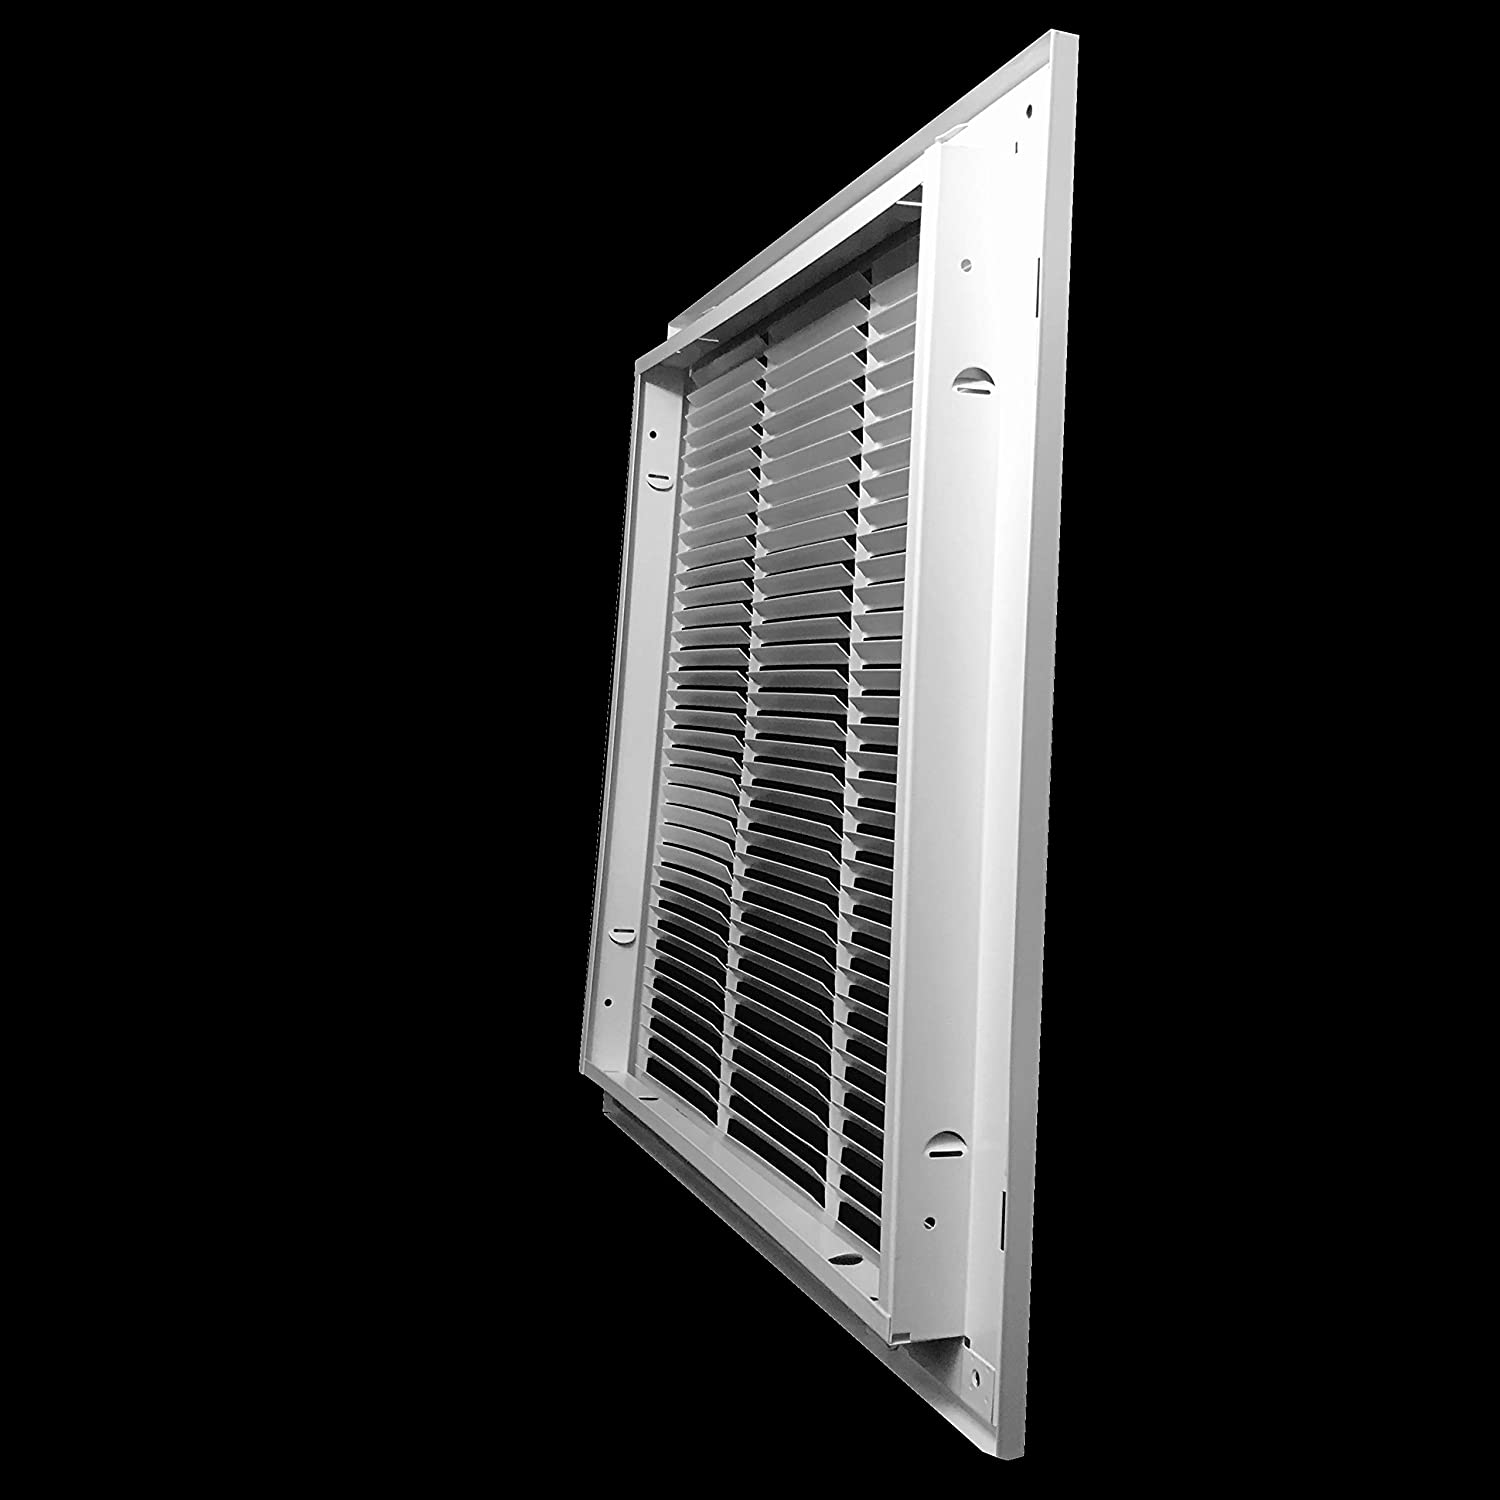 20" X 20" Duct Opening | Filter Included HD Steel Return Air Filter Grille for Sidewall and Ceiling